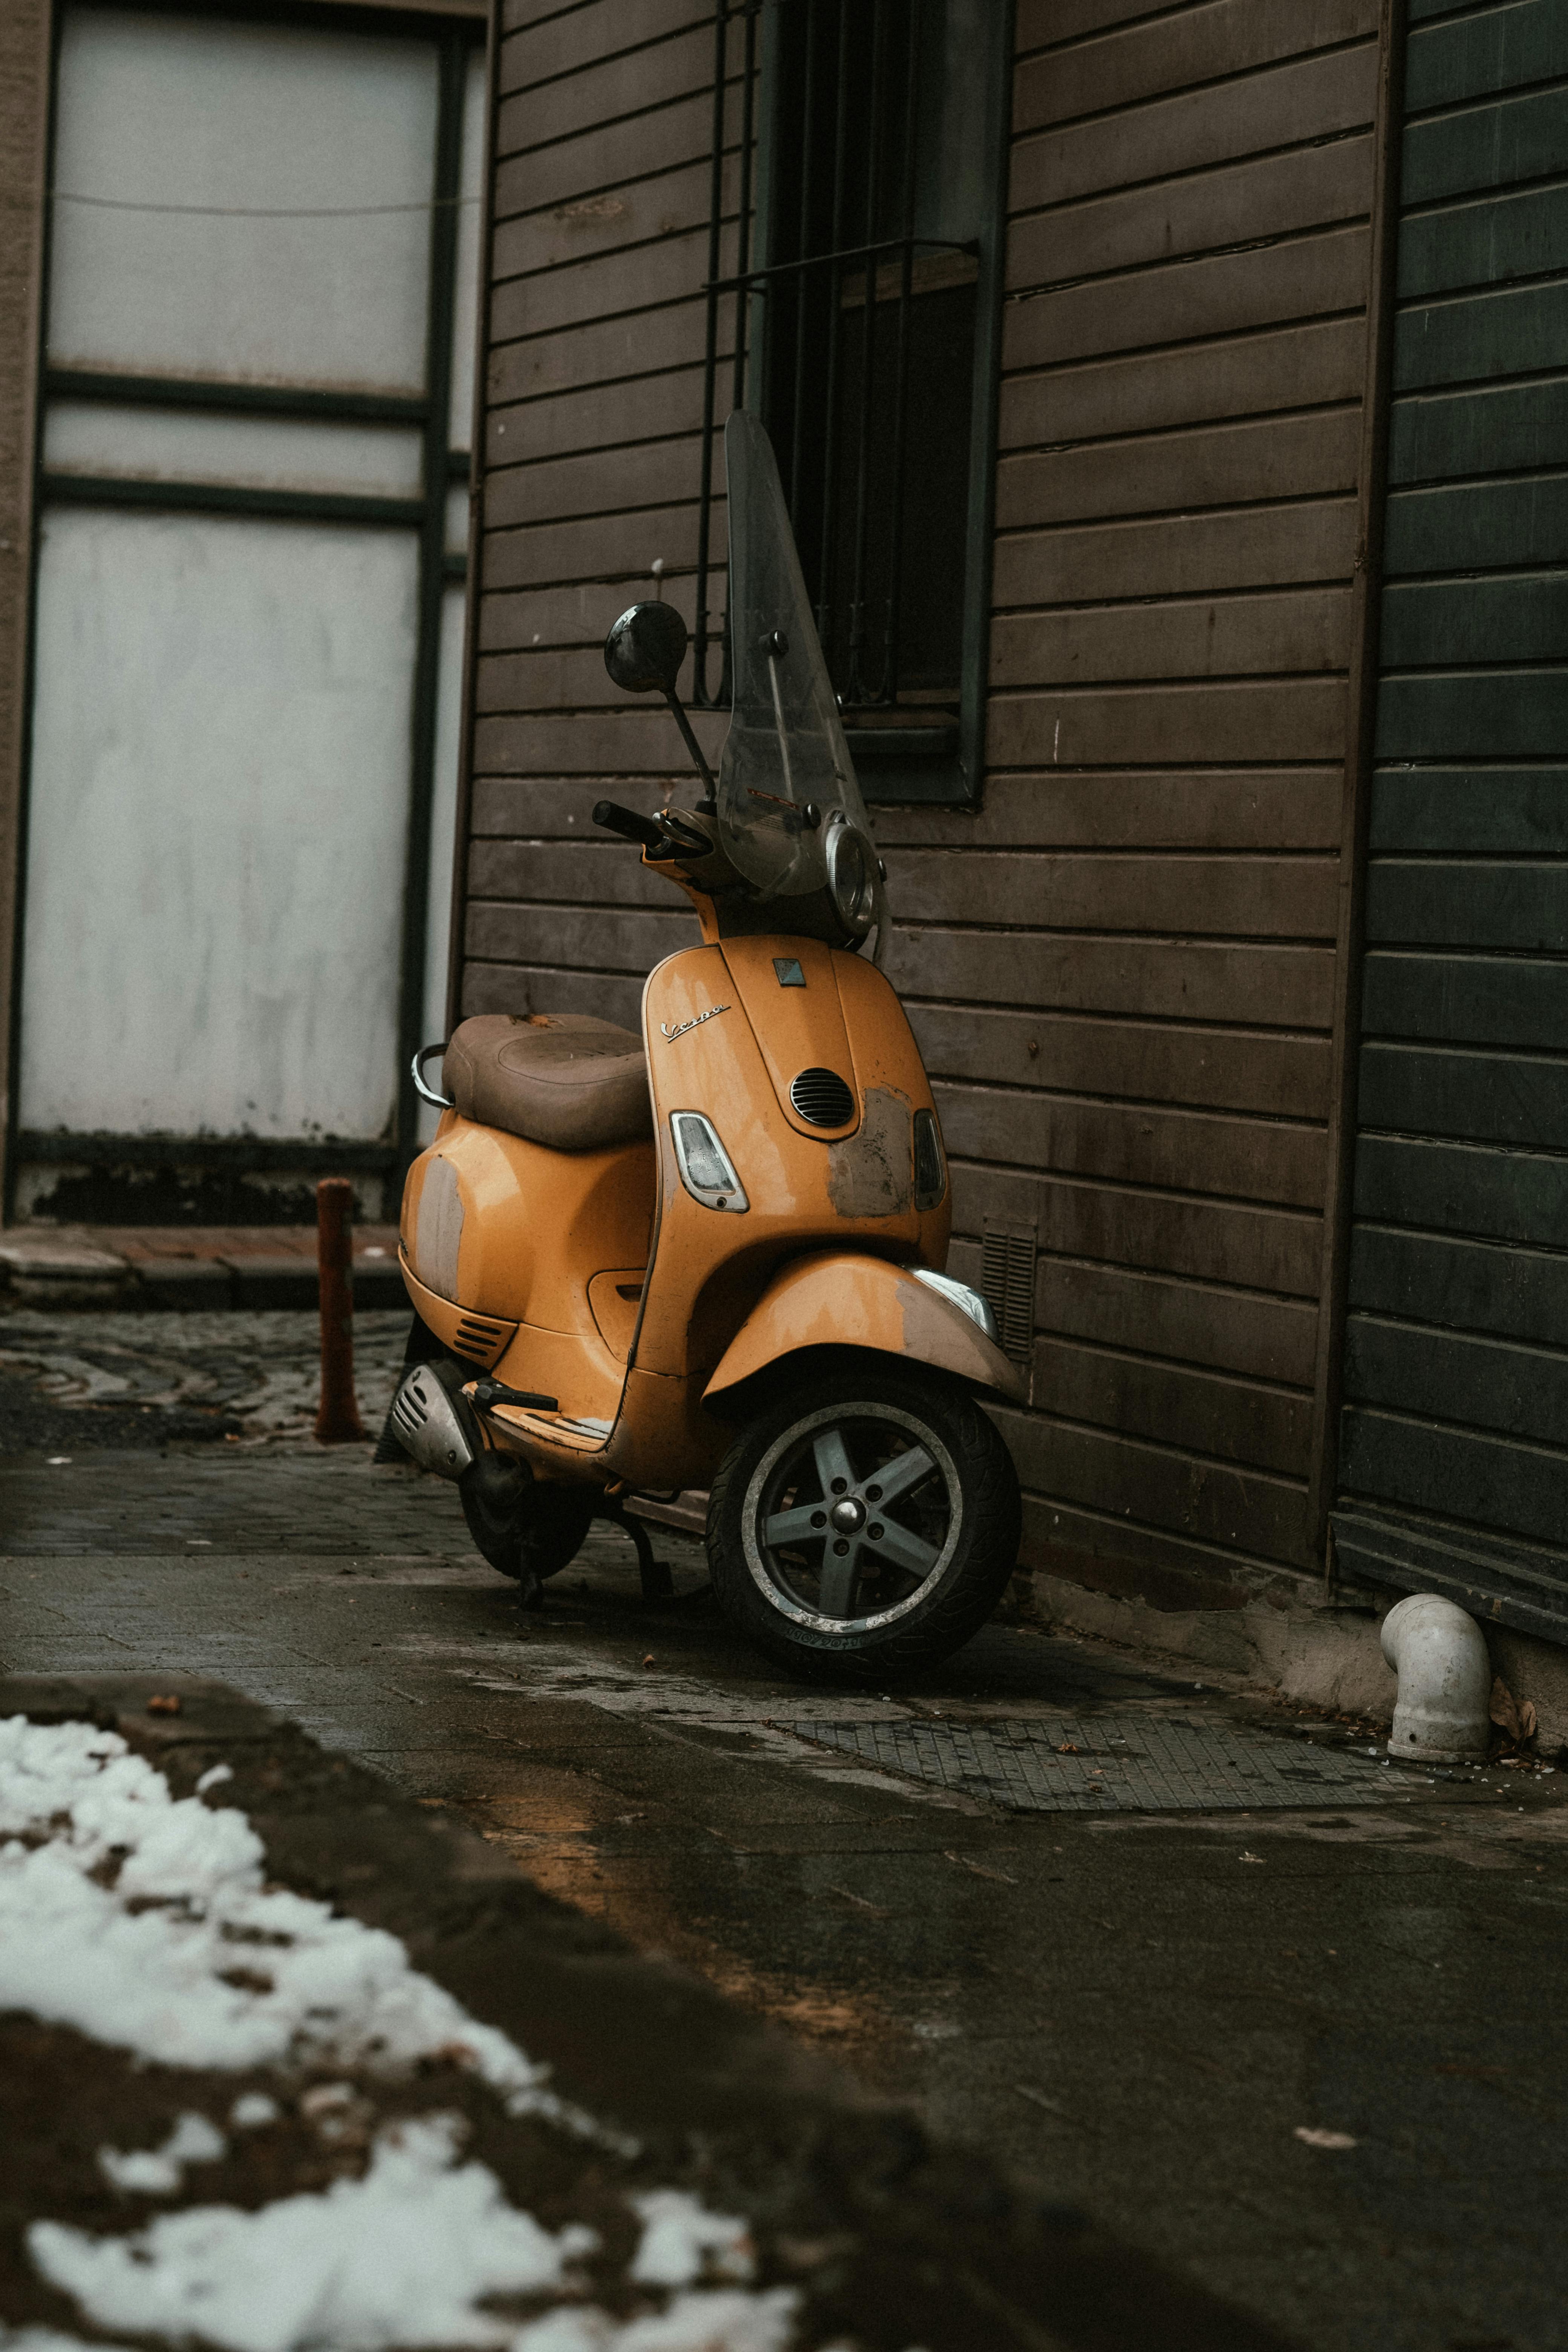 720 Scooter ideas in 2023 | scooter, vespa, vespa scooters